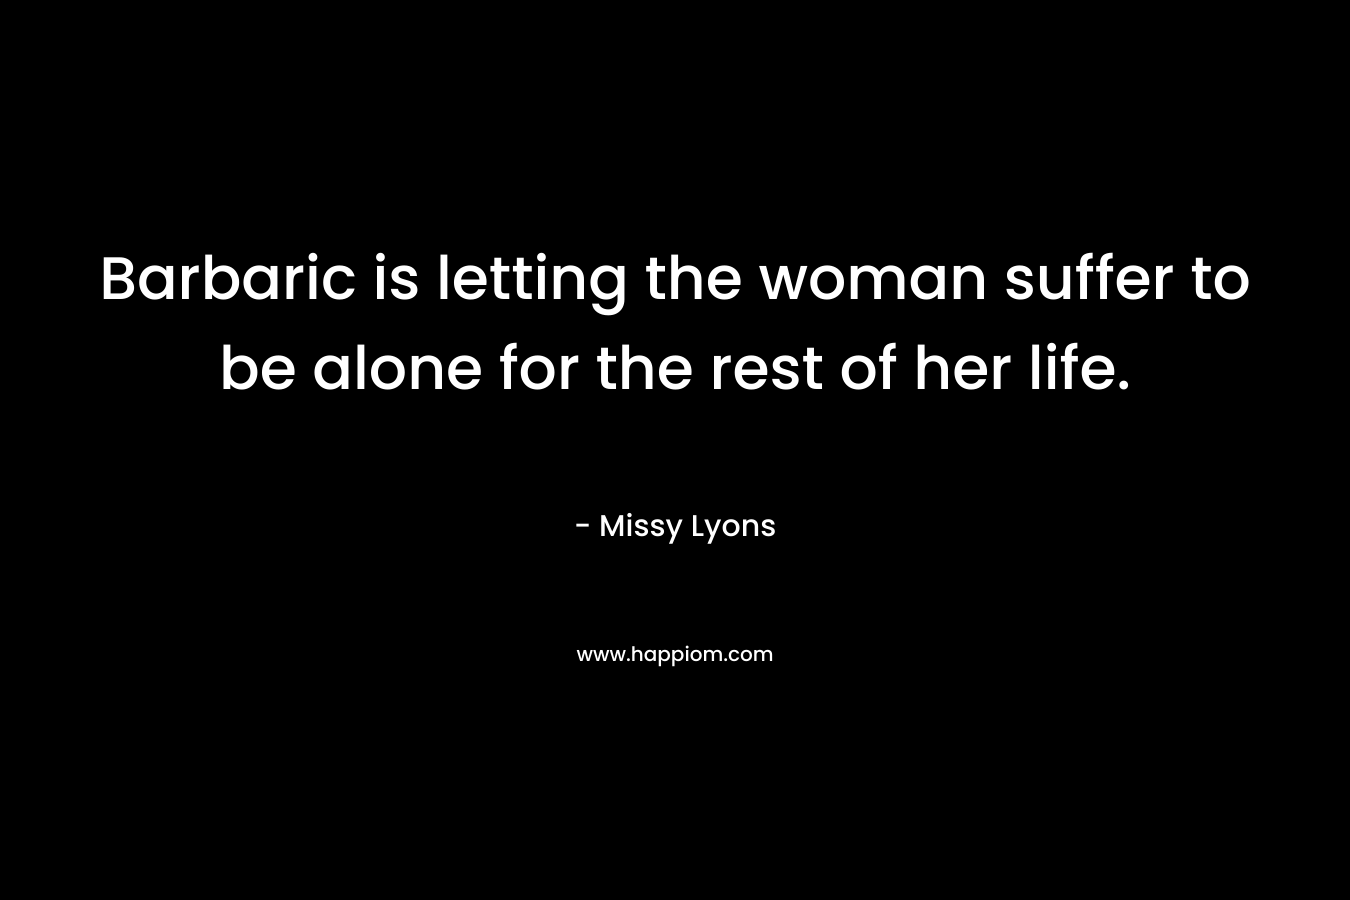 Barbaric is letting the woman suffer to be alone for the rest of her life. – Missy Lyons